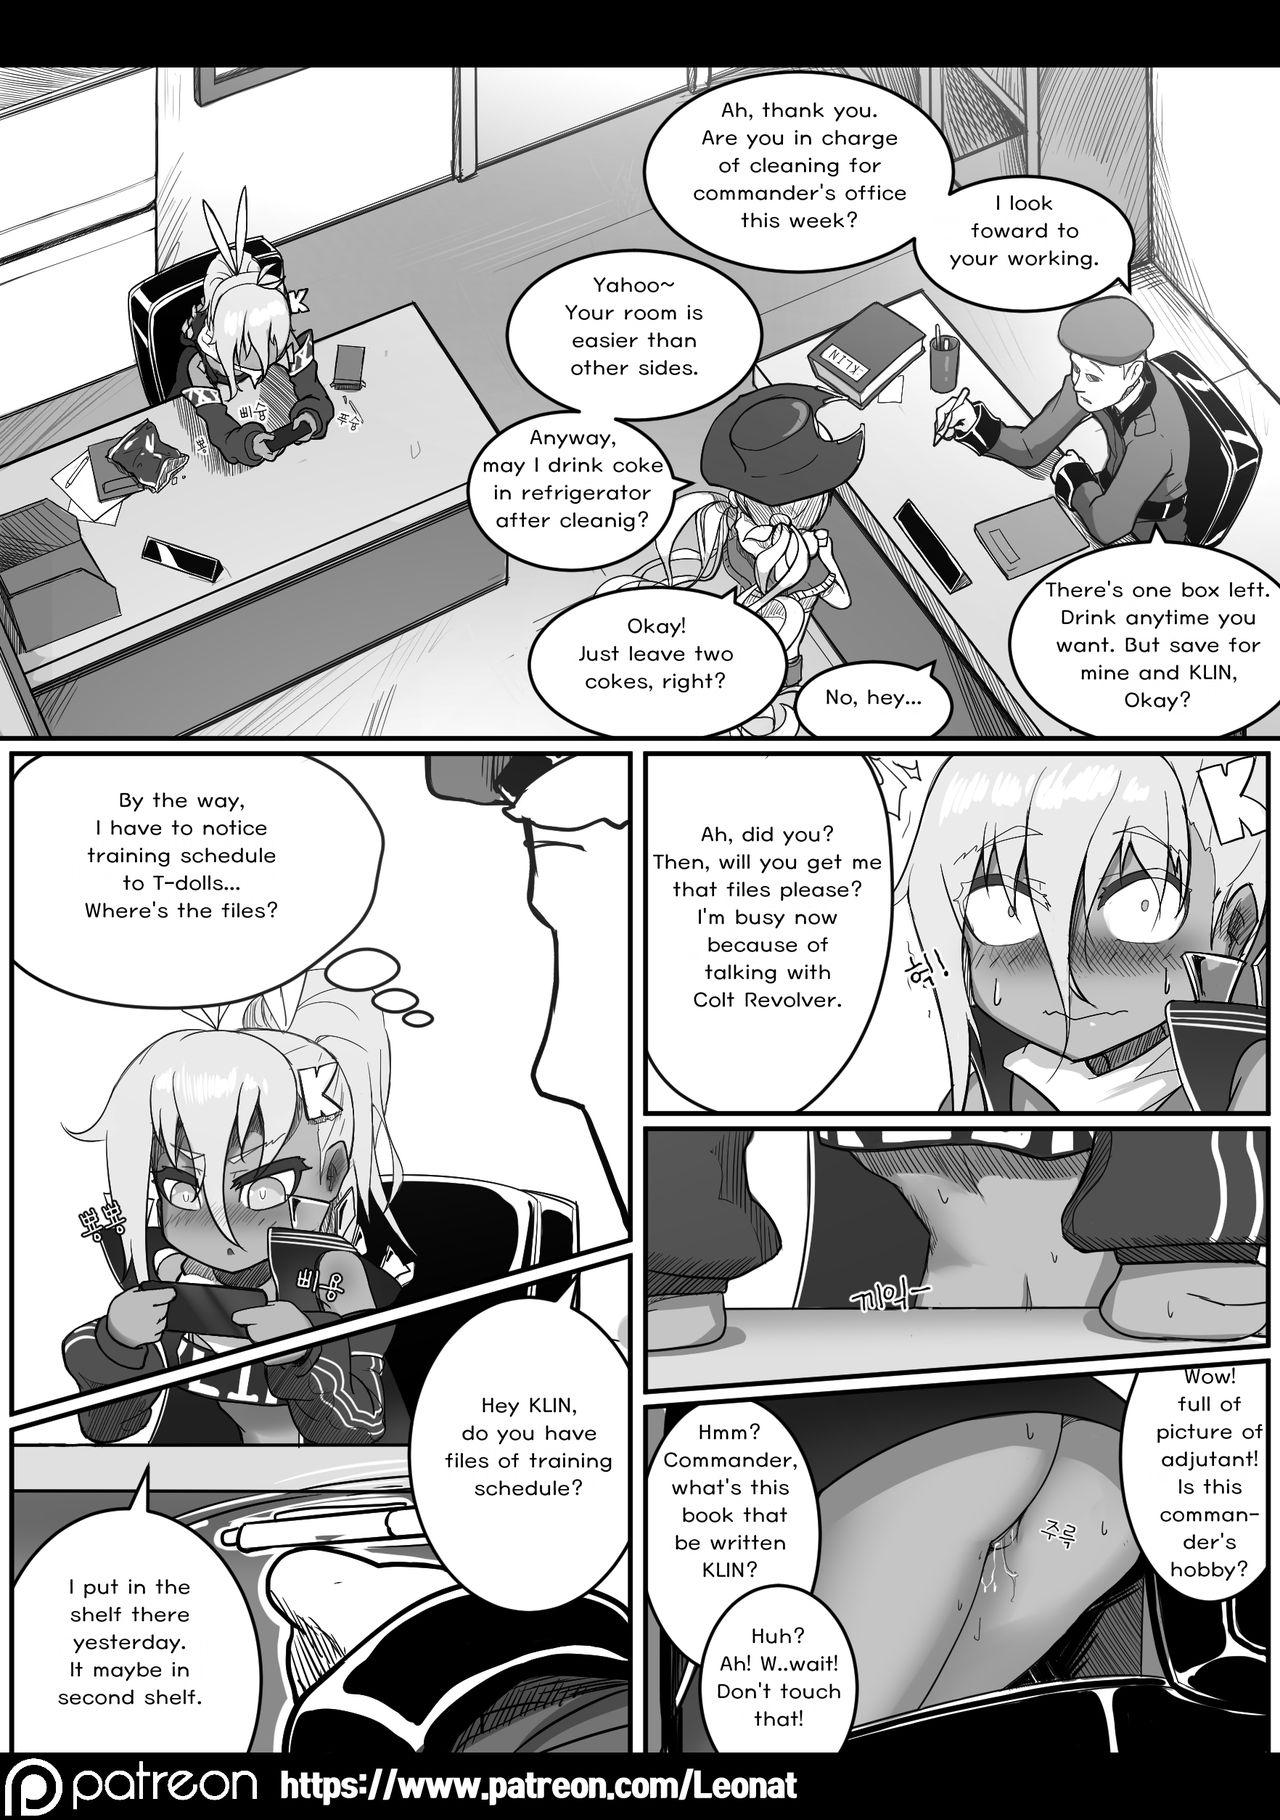 Shecock Lounge of HQ vol.1 - Girls frontline Nerd - Page 10